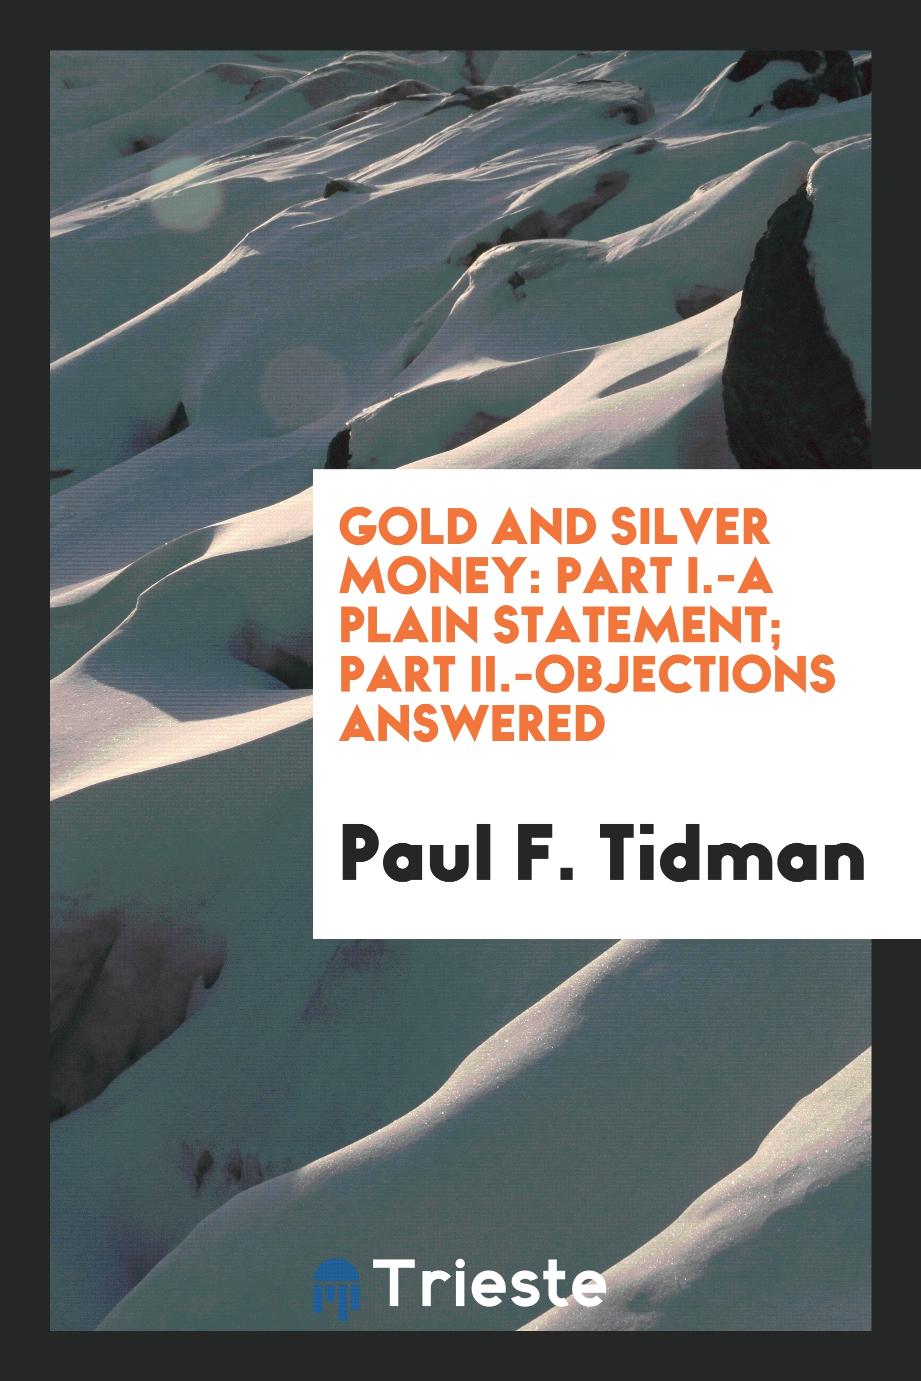 Gold and Silver Money: Part I.-A Plain Statement; Part II.-Objections Answered